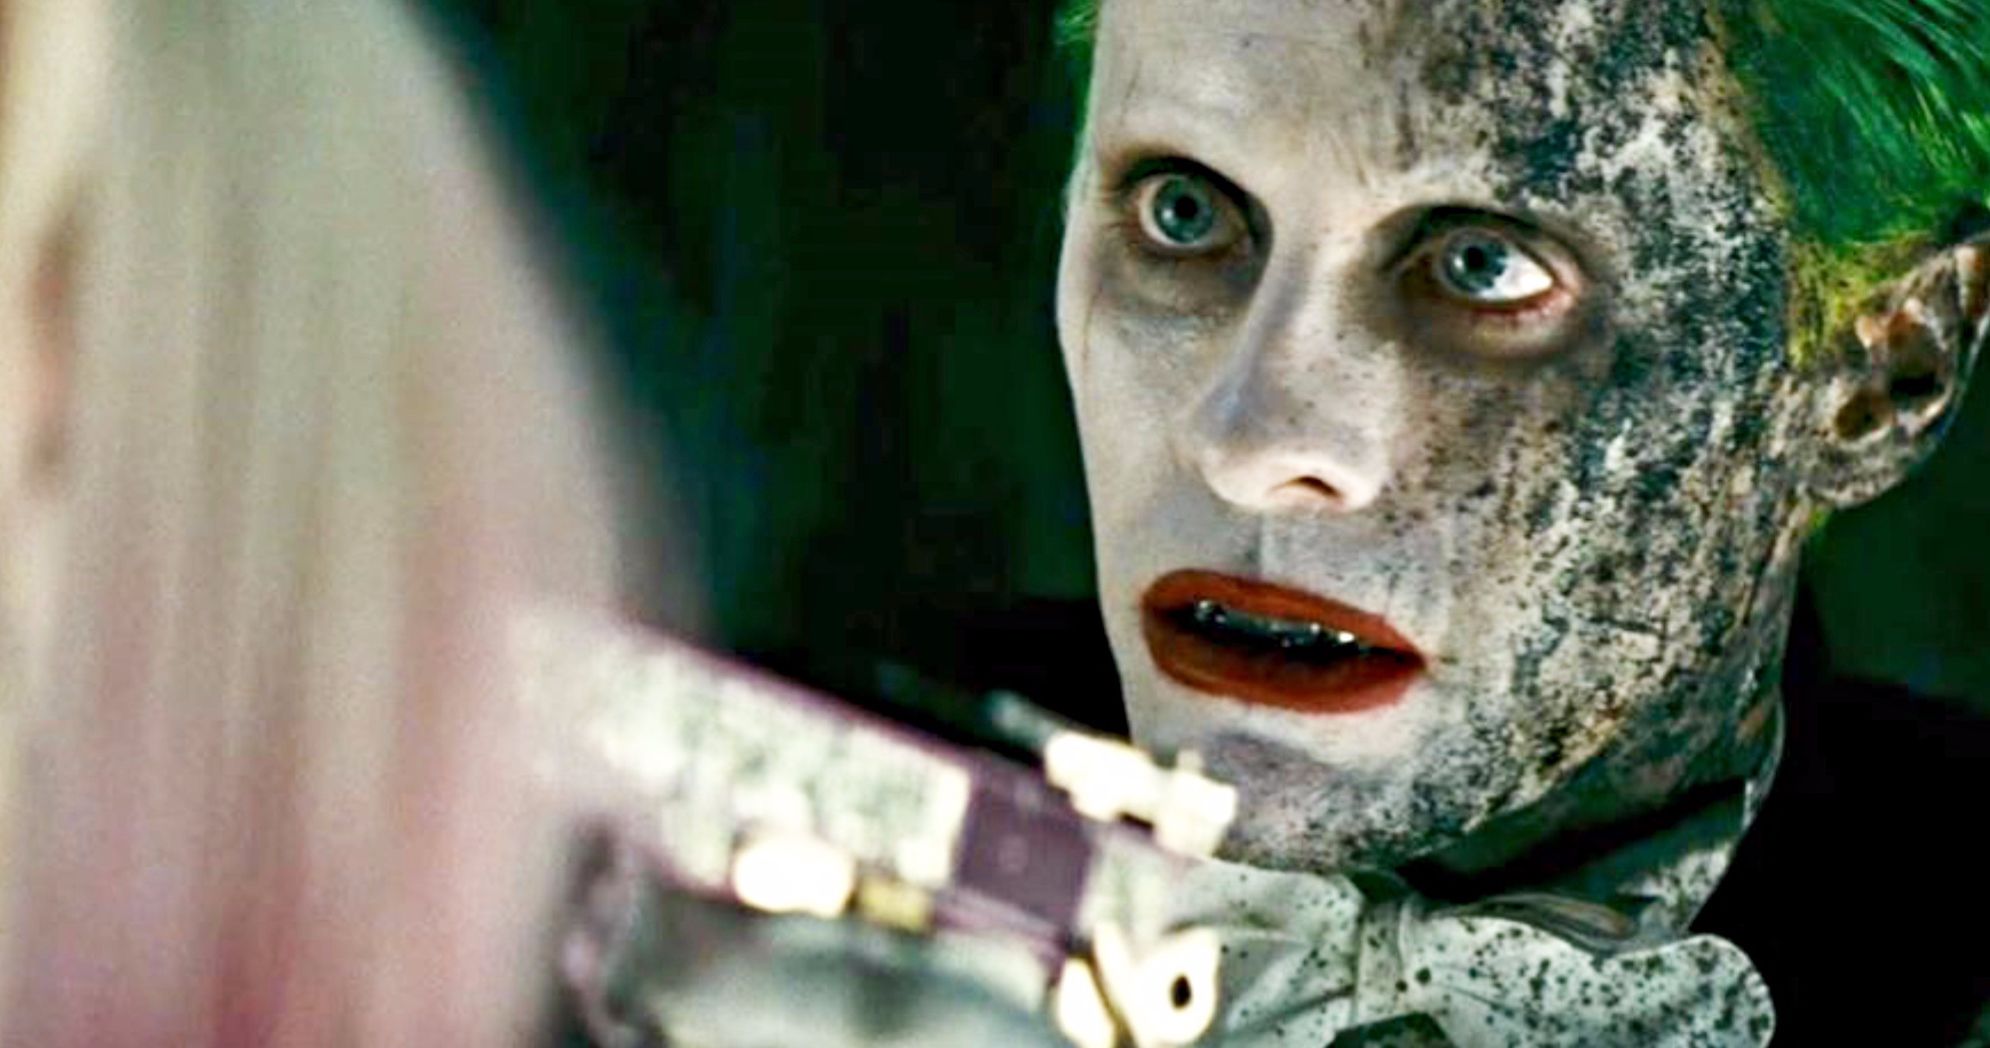 Suicide Squad Director Takes Swipe at His Own Movie, Shares Unseen Joker Image